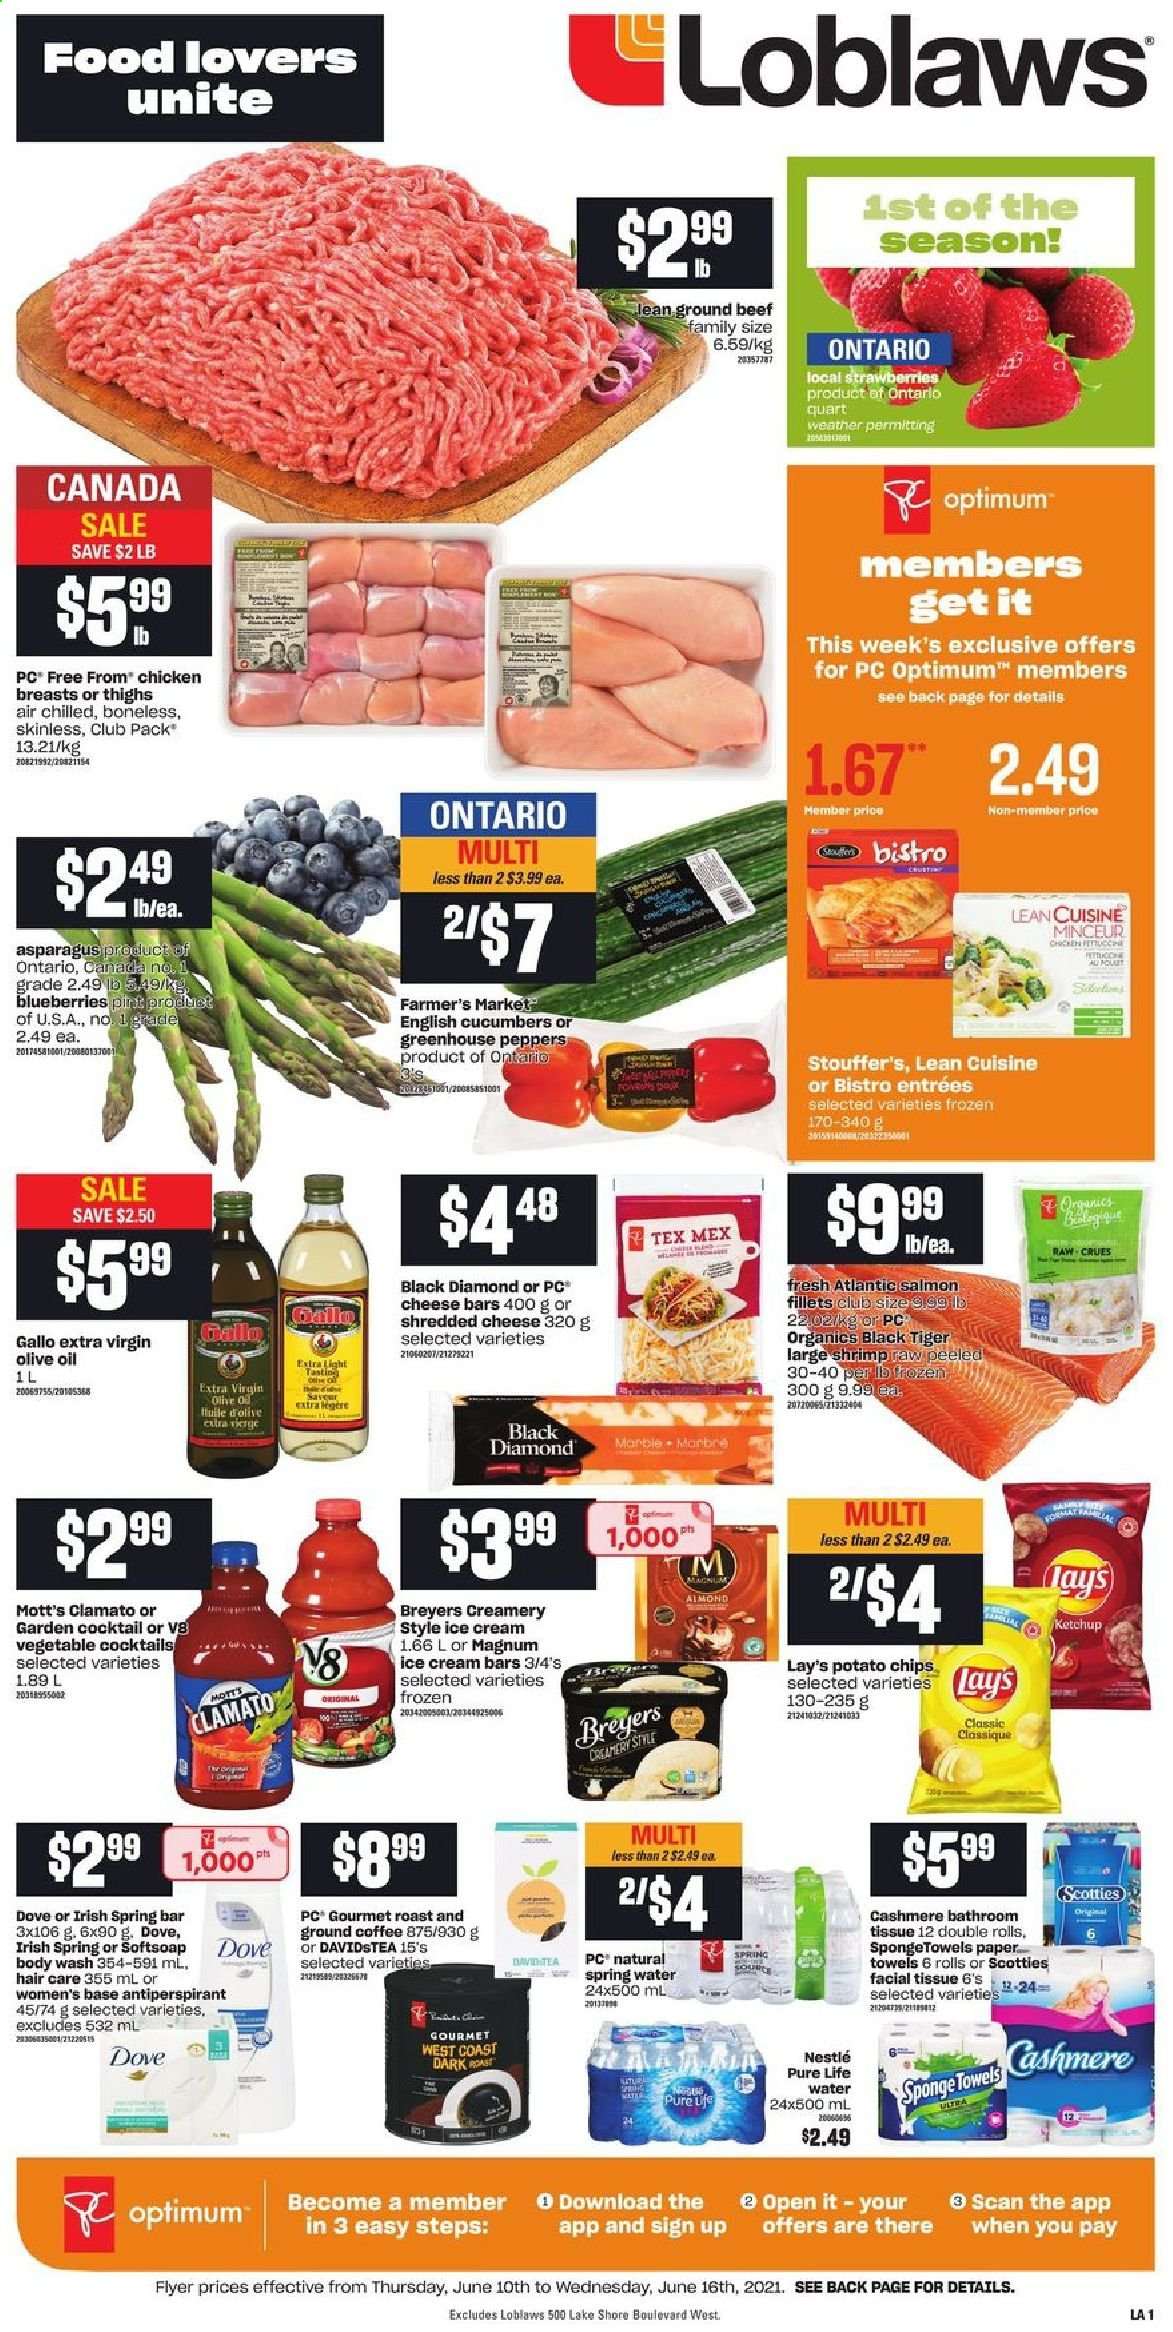 thumbnail - Loblaws Flyer - June 10, 2021 - June 16, 2021 - Sales products - asparagus, cucumber, peppers, blueberries, strawberries, Mott's, salmon, salmon fillet, shrimps, Lean Cuisine, shredded cheese, Magnum, ice cream, ice cream bars, Stouffer's, potato chips, Lay’s, extra virgin olive oil, olive oil, oil, Clamato, spring water, coffee, ground coffee, chicken breasts, beef meat, ground beef, bath tissue, body wash, Softsoap, anti-perspirant, Optimum, Nestlé. Page 1.